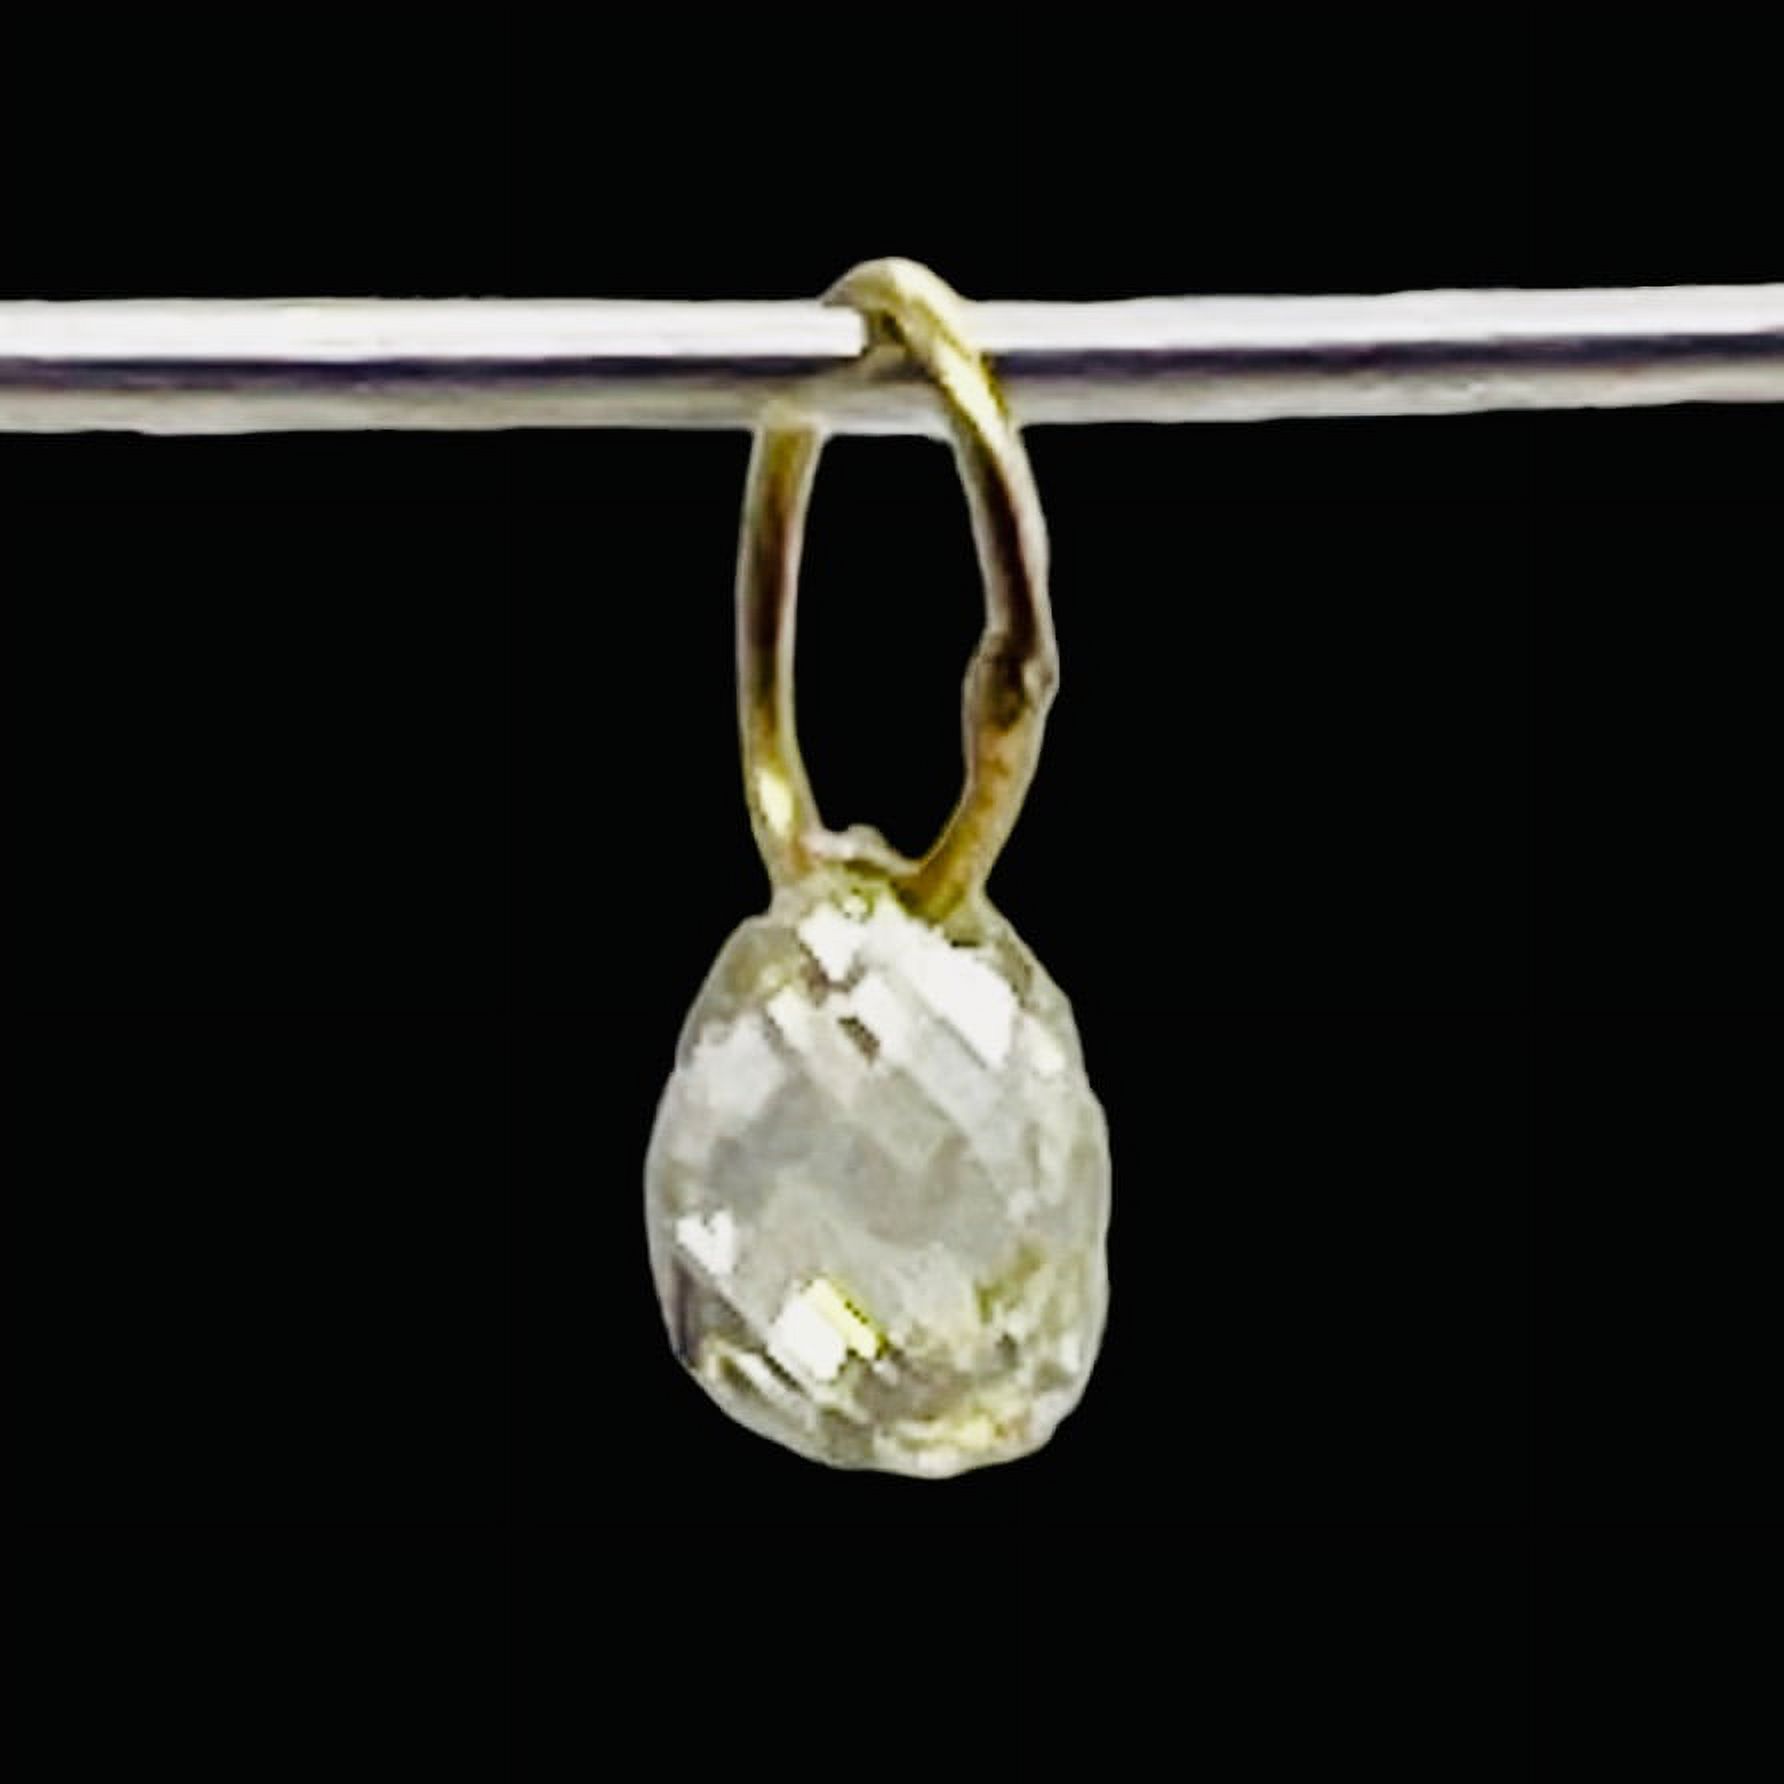 0.28cts Natural Canary Diamond 18K Gold Pendant | 3.25x2.5x2.25mm | - image 3 of 12